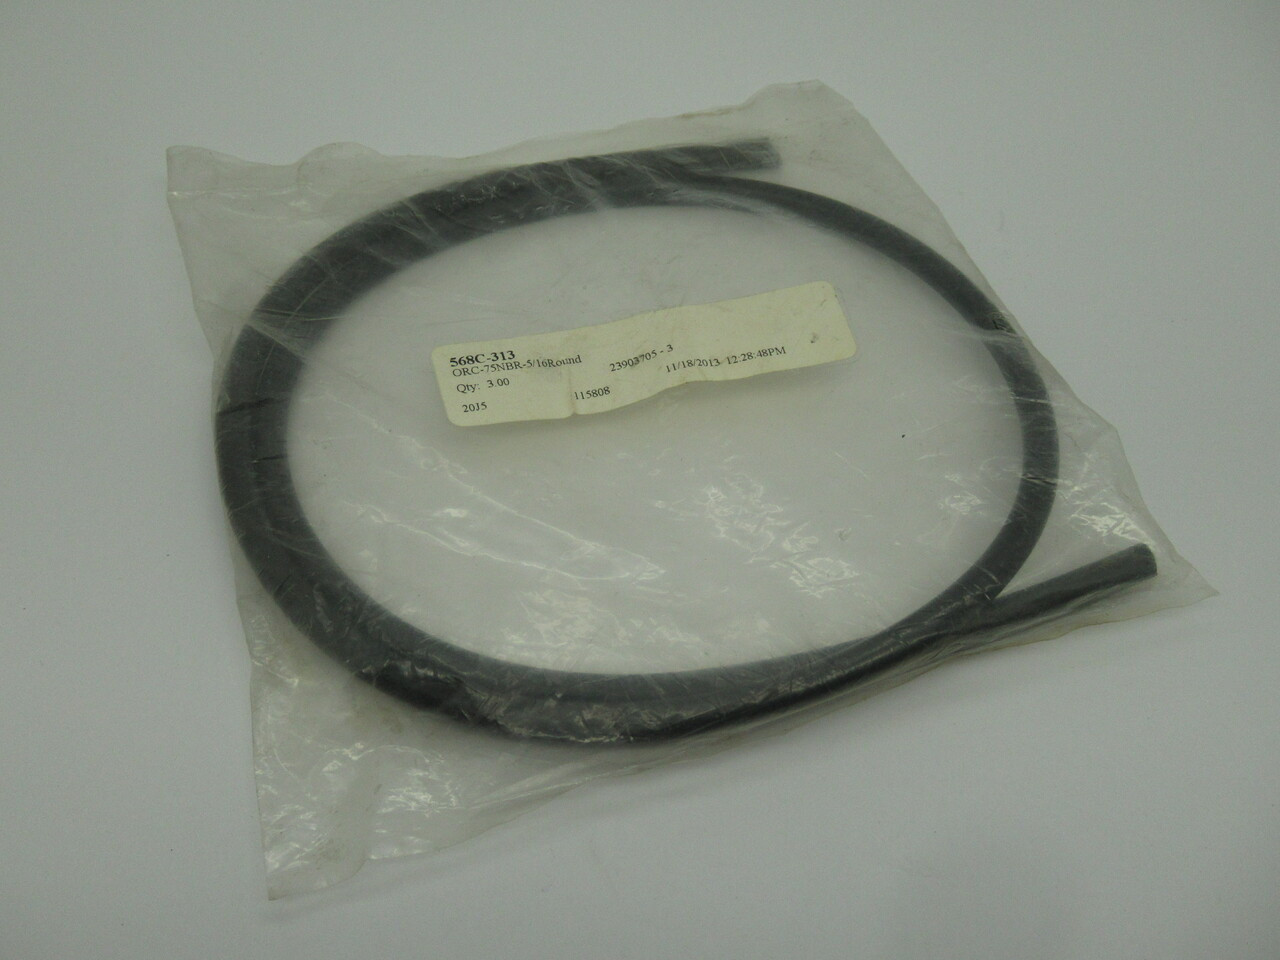 Hercules Sealing Products 568C-313 ORC-75NBR-5/16 Round O-Ring Cord NWB